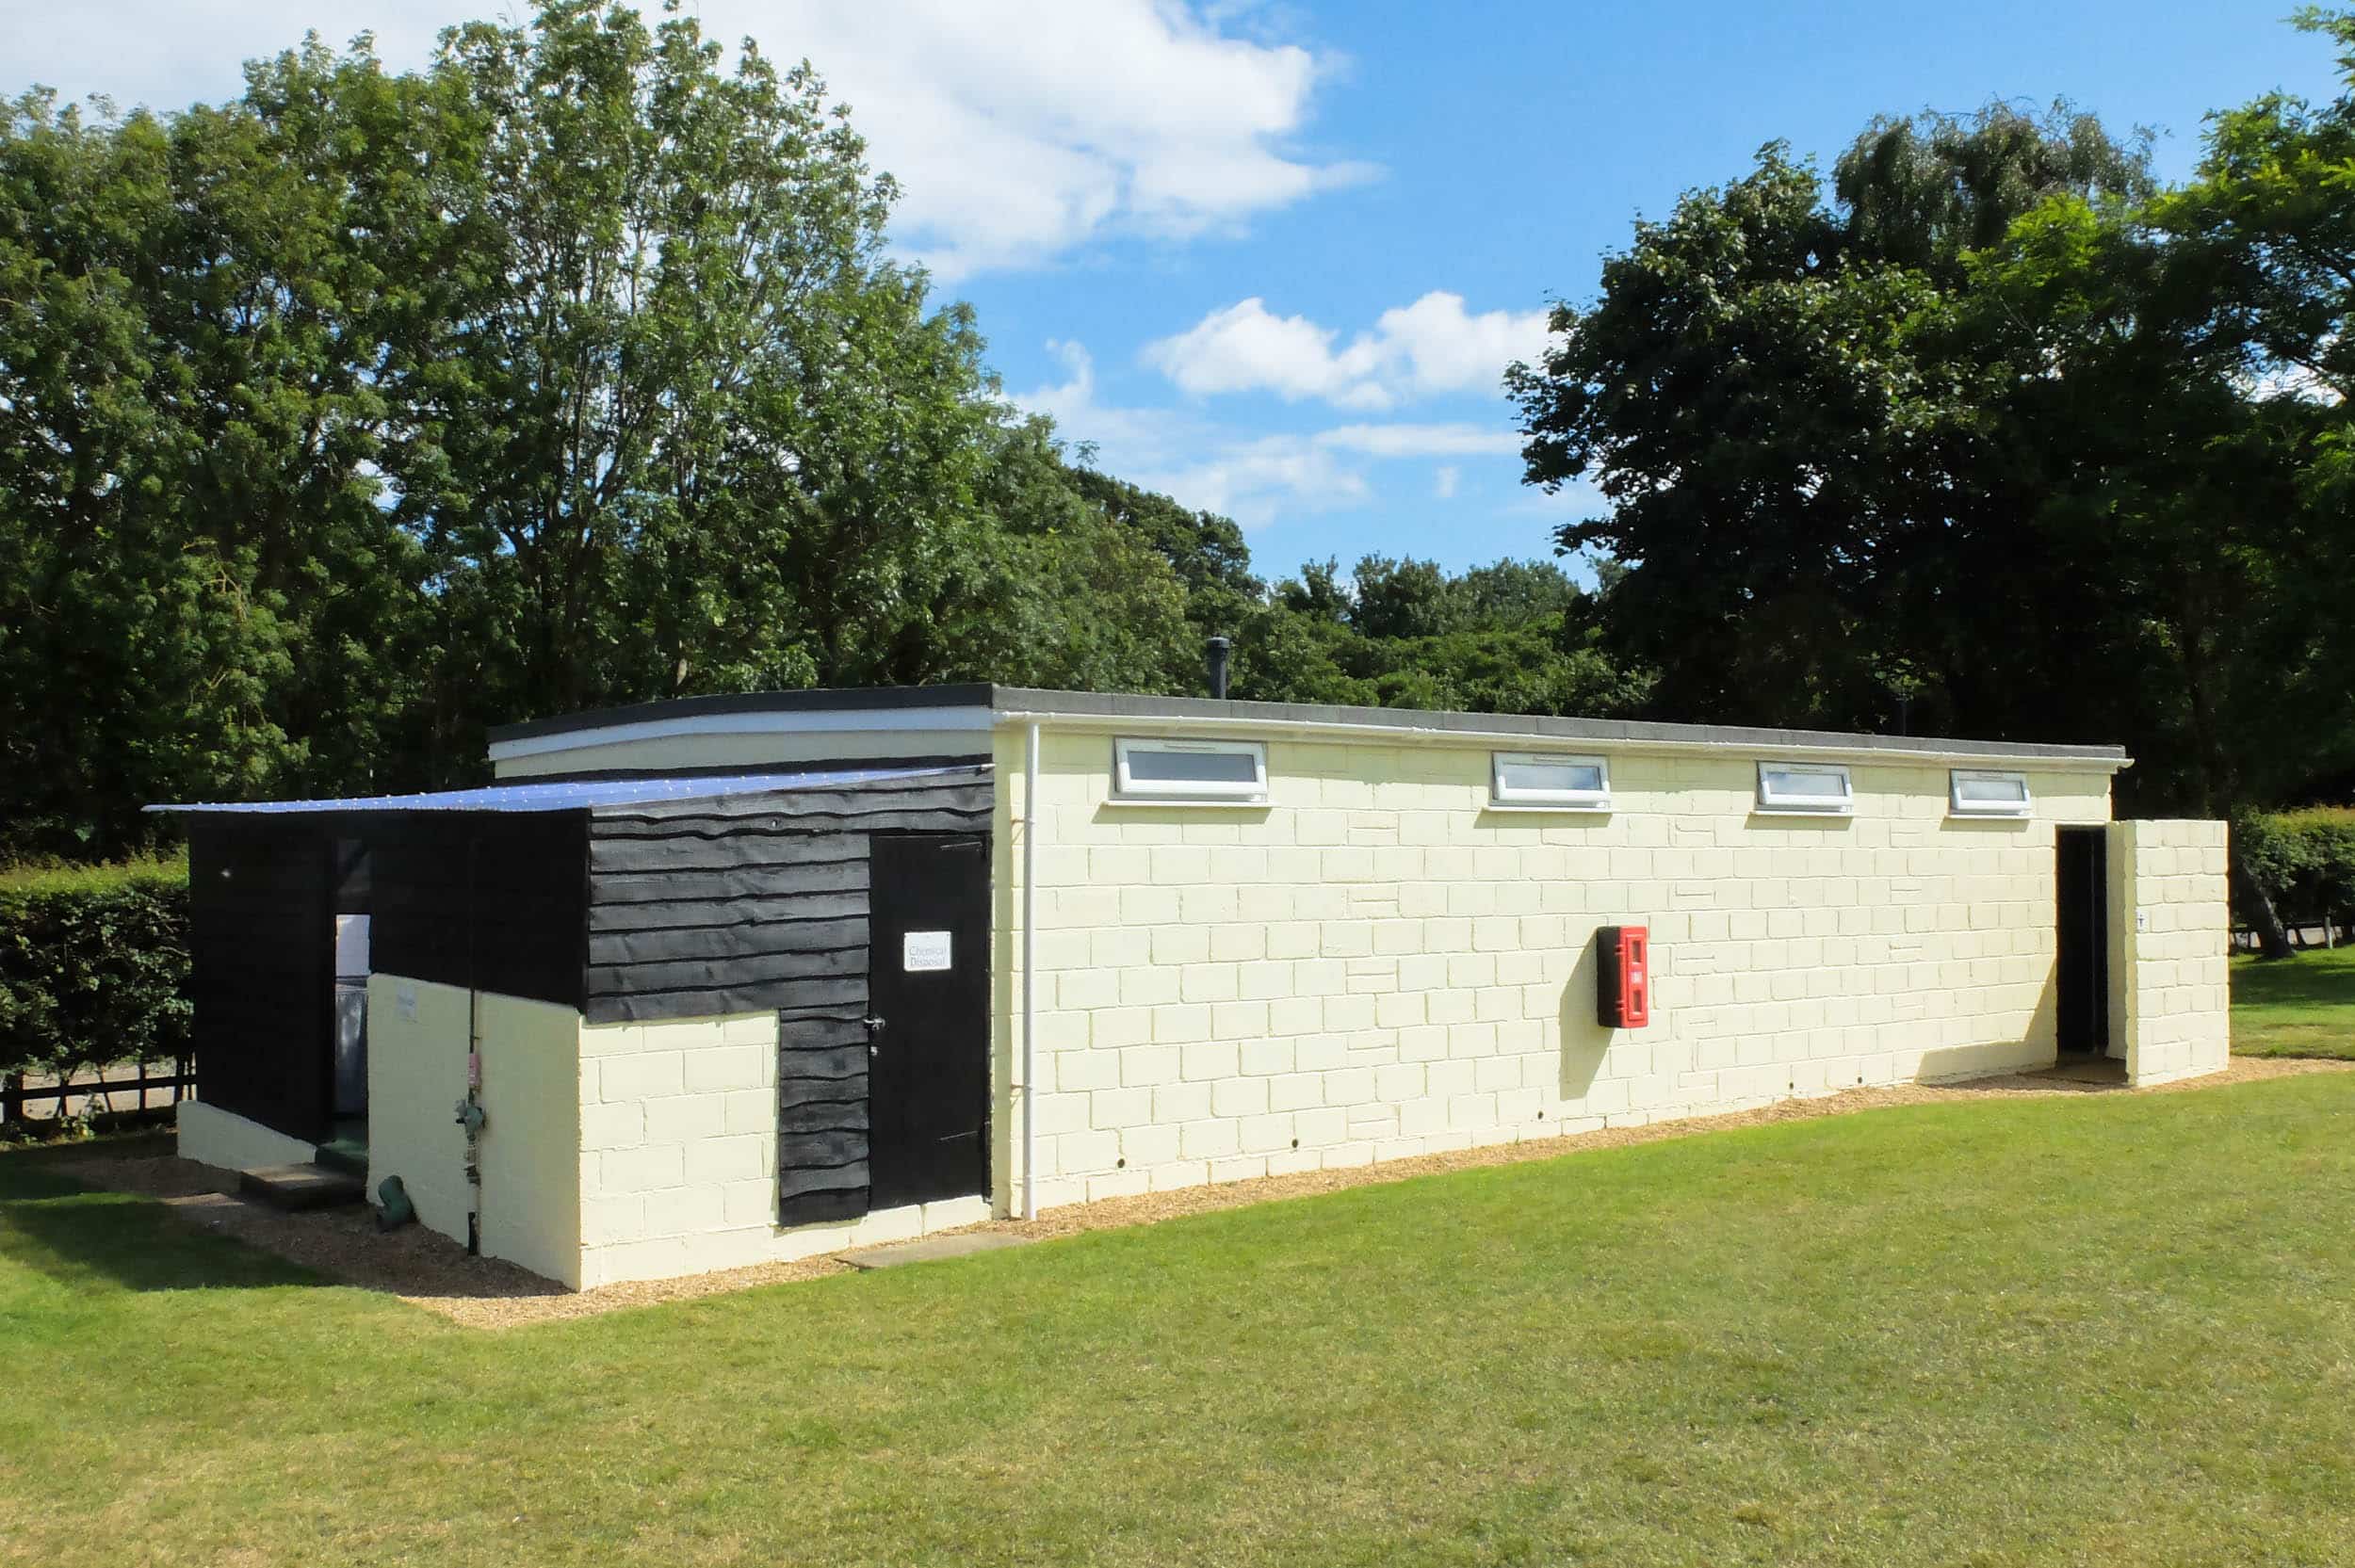 Picture of the willowbrook campsite facilities block near Shanklin